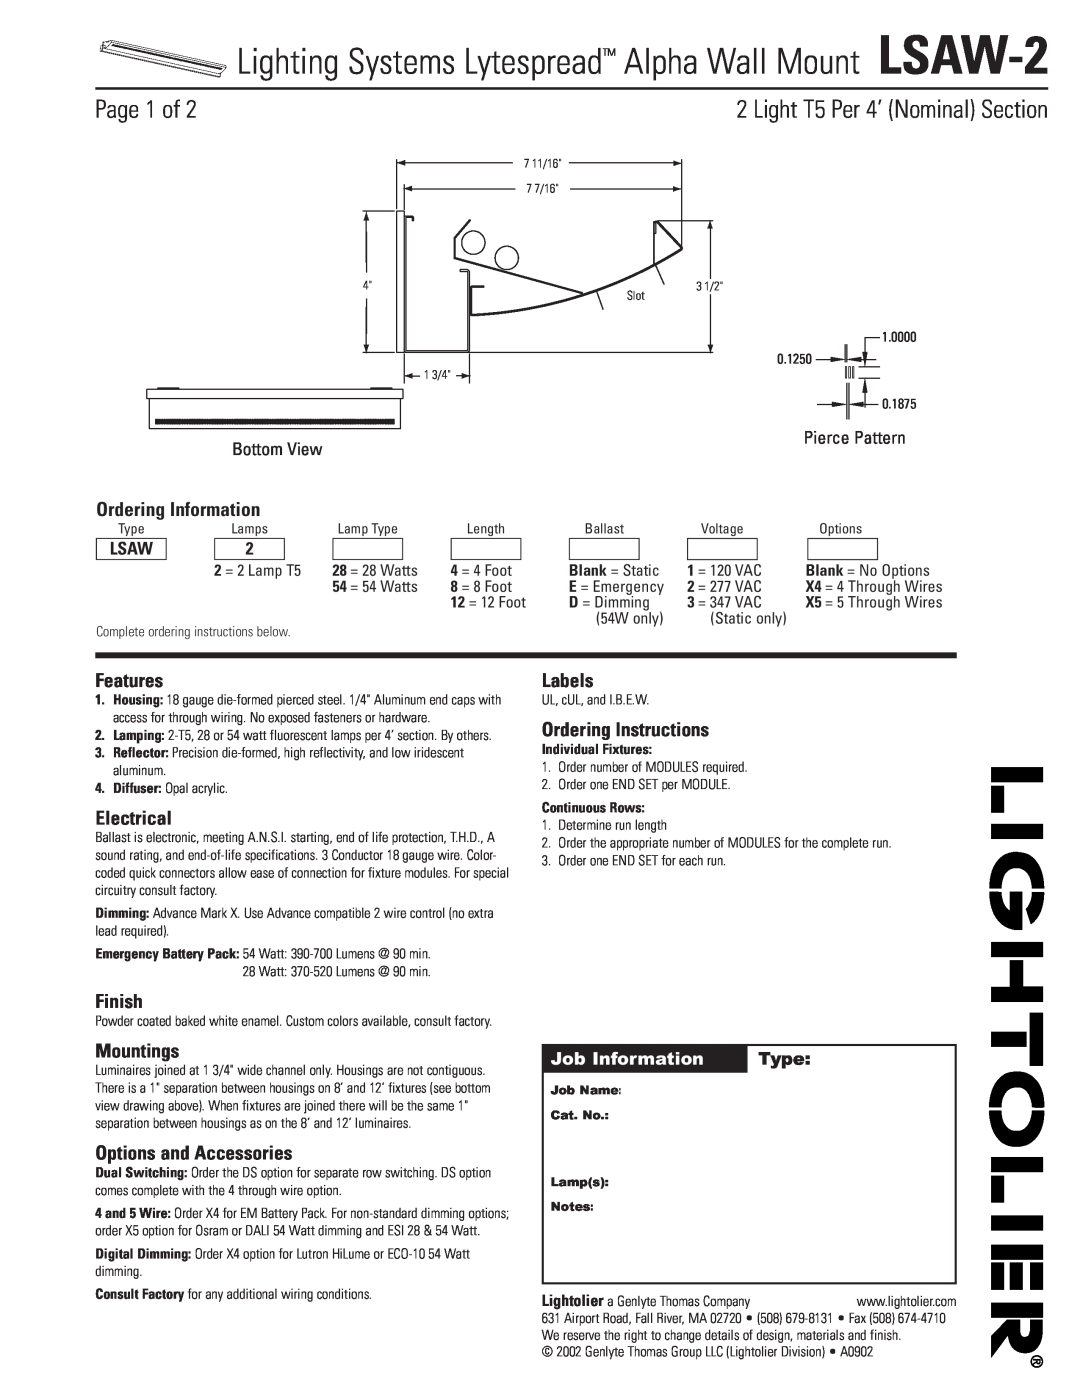 Lightolier specifications Lighting Systems Lytespread Alpha Wall Mount LSAW-2, Page 1 of, Ordering Information, Finish 